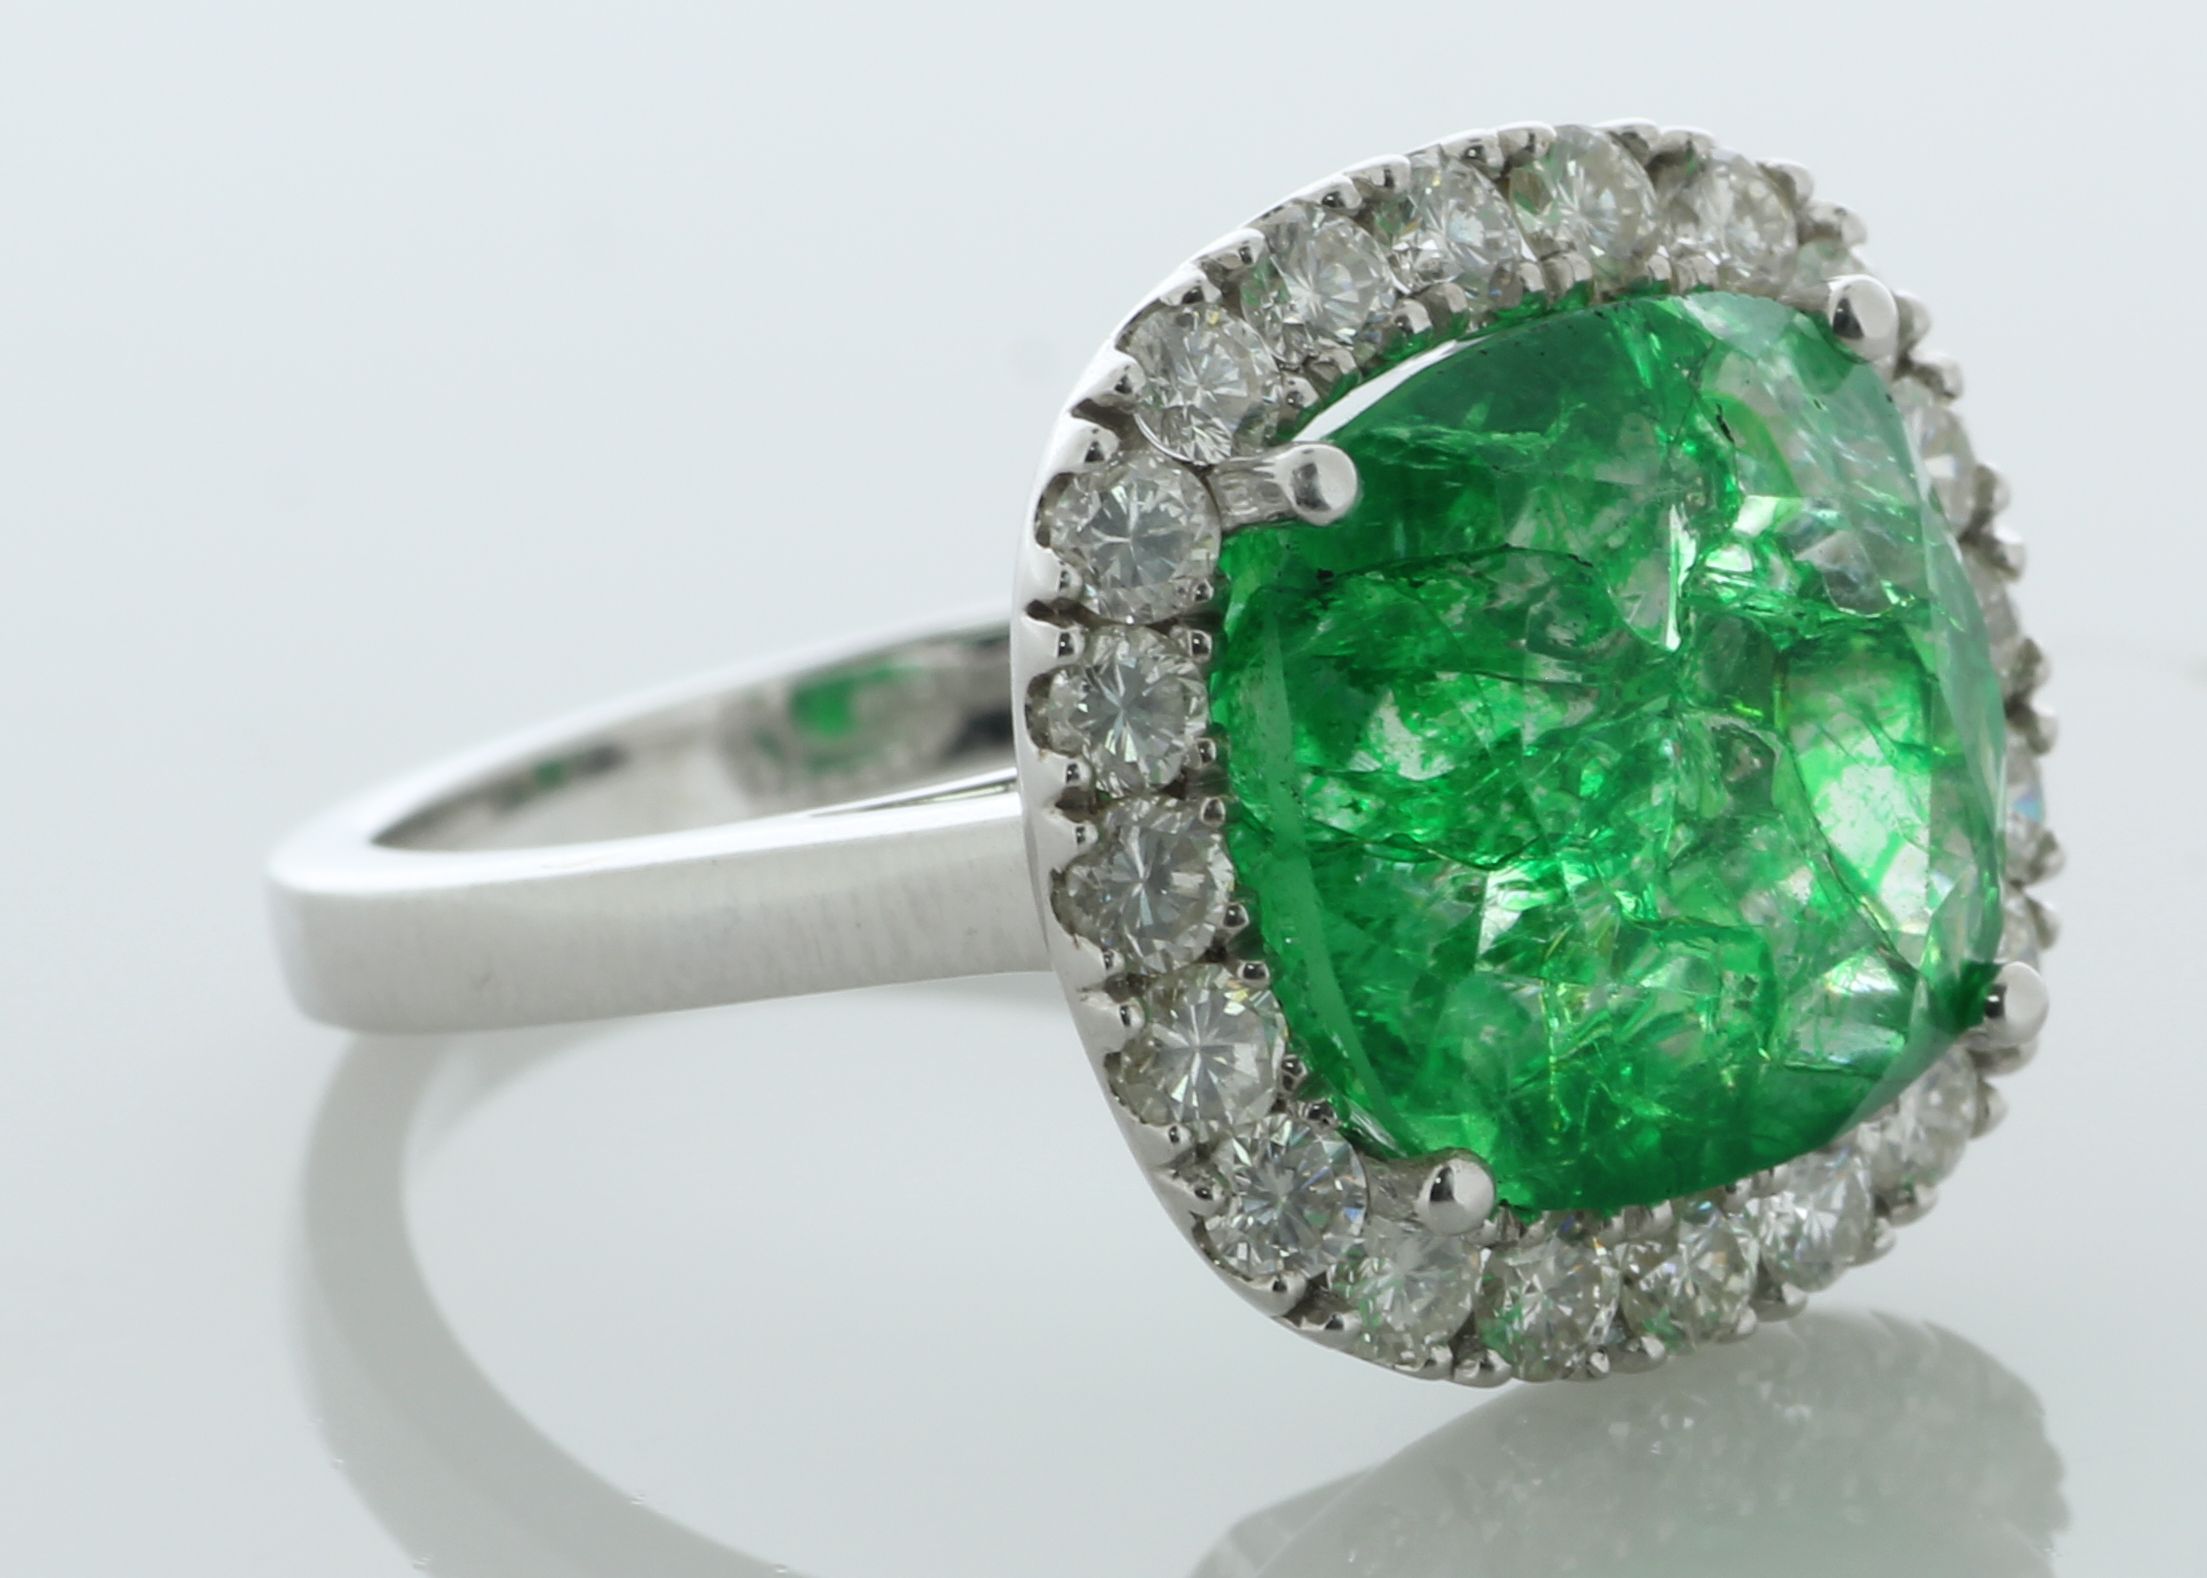 18ct White Gold cushion Emerald and Diamond Cluster Ring (7.99) 1.07 Carats - Image 4 of 5